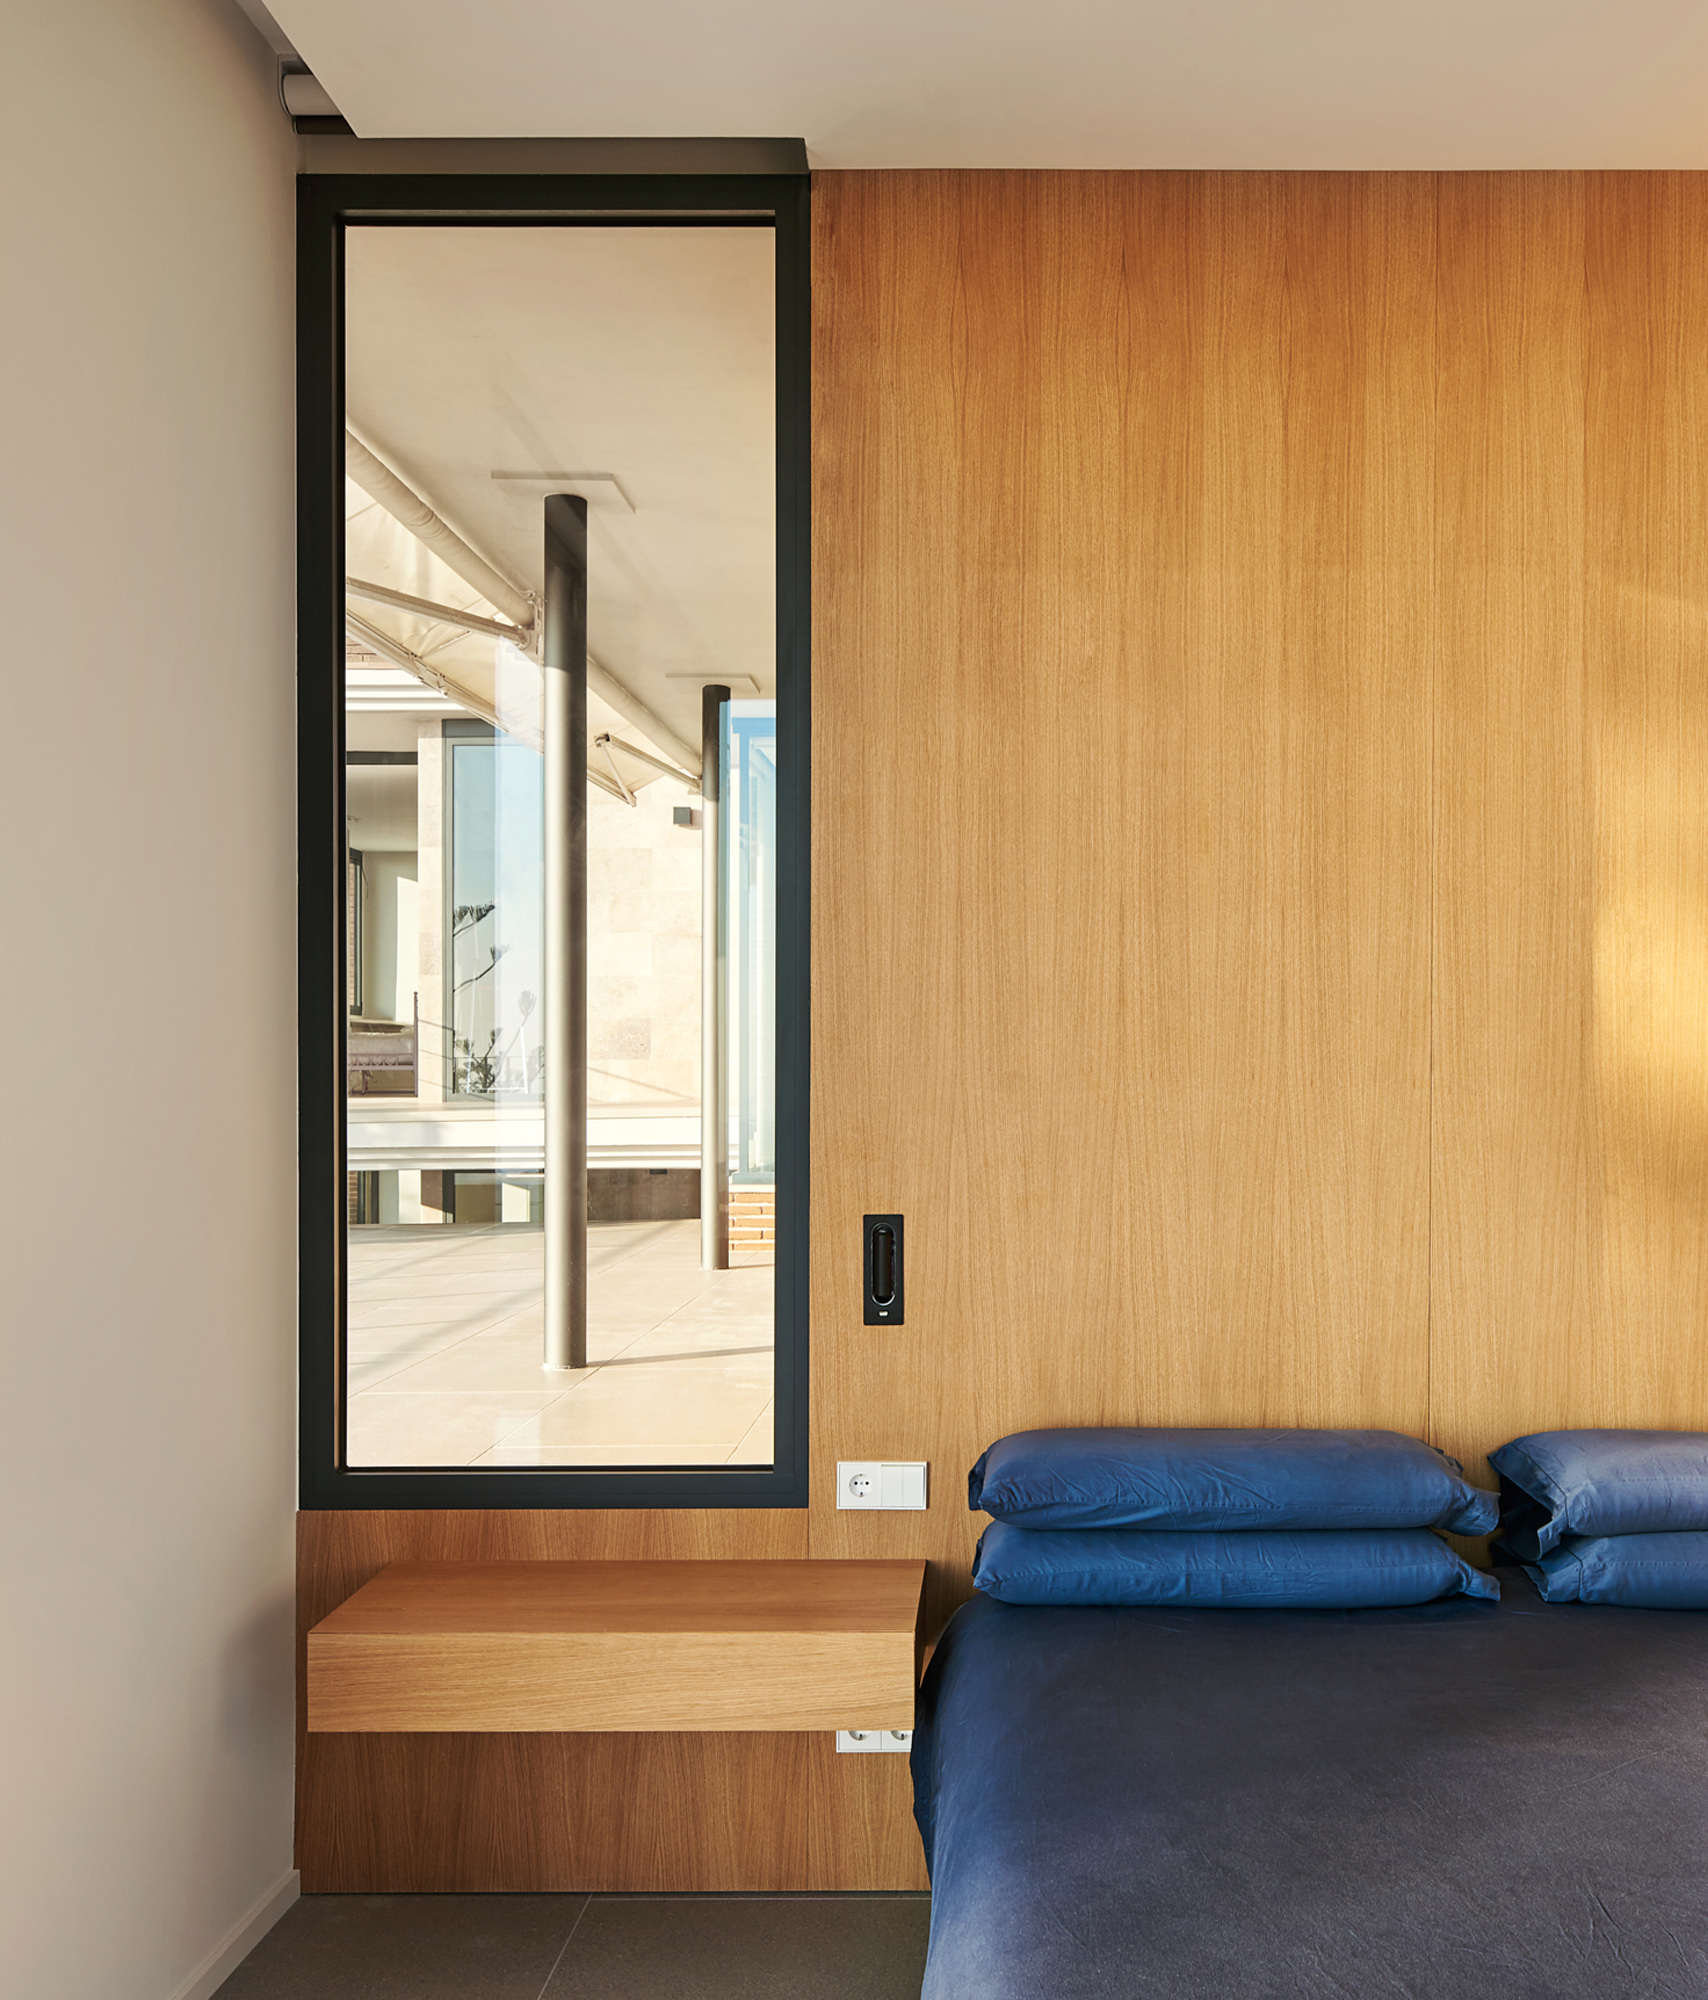 a modern bedroom detail with view on the terrace